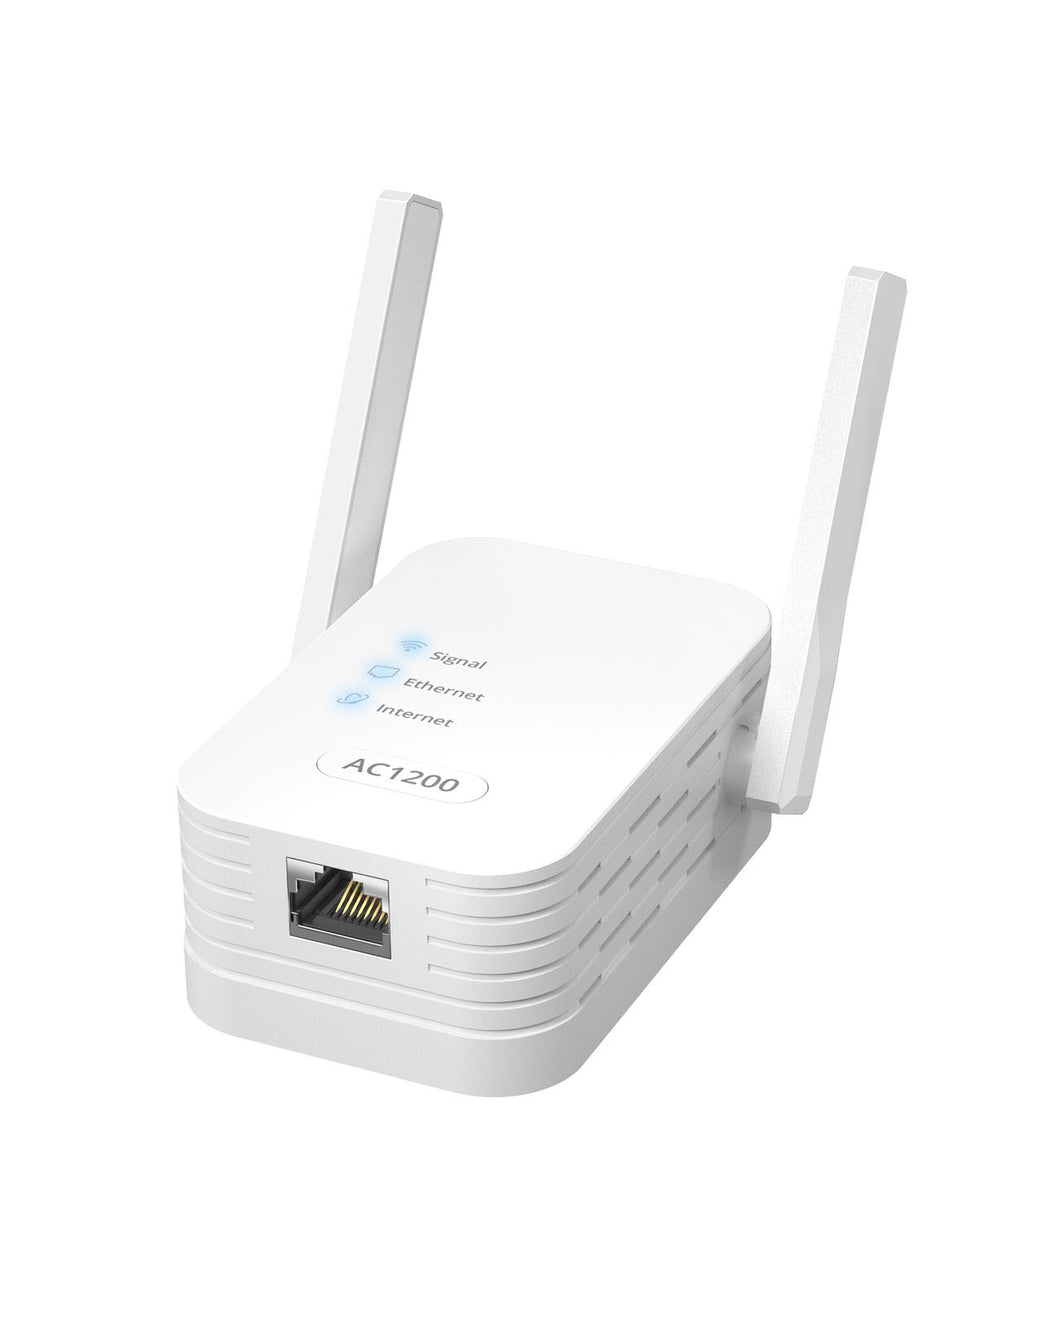 ioGiant 1200Mbps WiFi to Ethernet Adapter with 100Mbps LAN Port Works with Any Wired Devices Such as Your Printer TV Desktop Laptop PC Streaming Player VoIP Phone Camera Supports 5GHz Connection with a Wireless Router